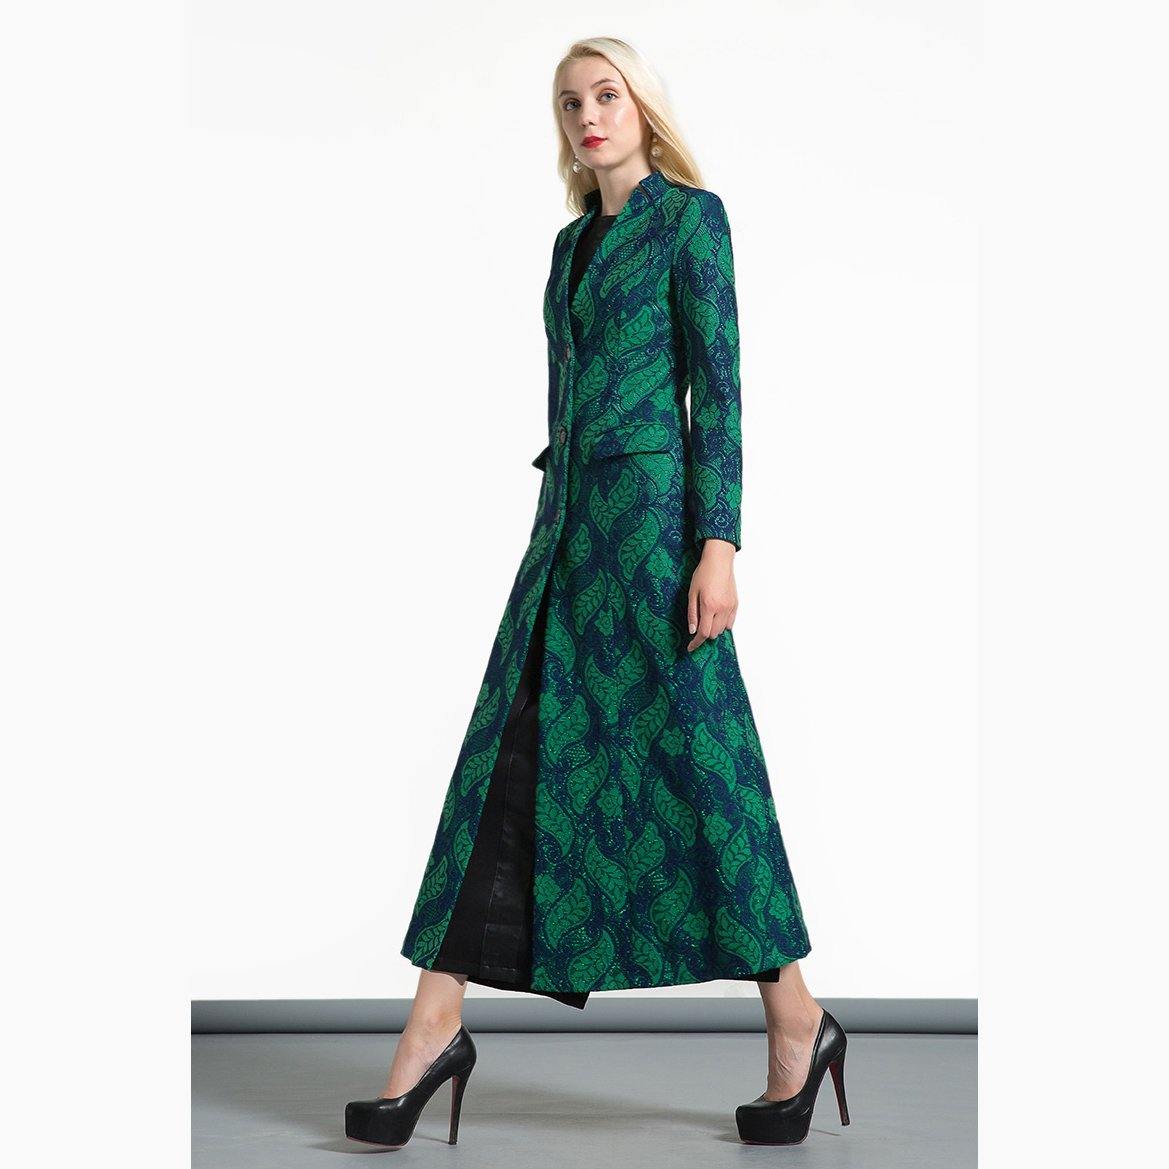 2017 autumn winter new jacquard cotton blended trench coats green slim fit maxi coat - Omychic